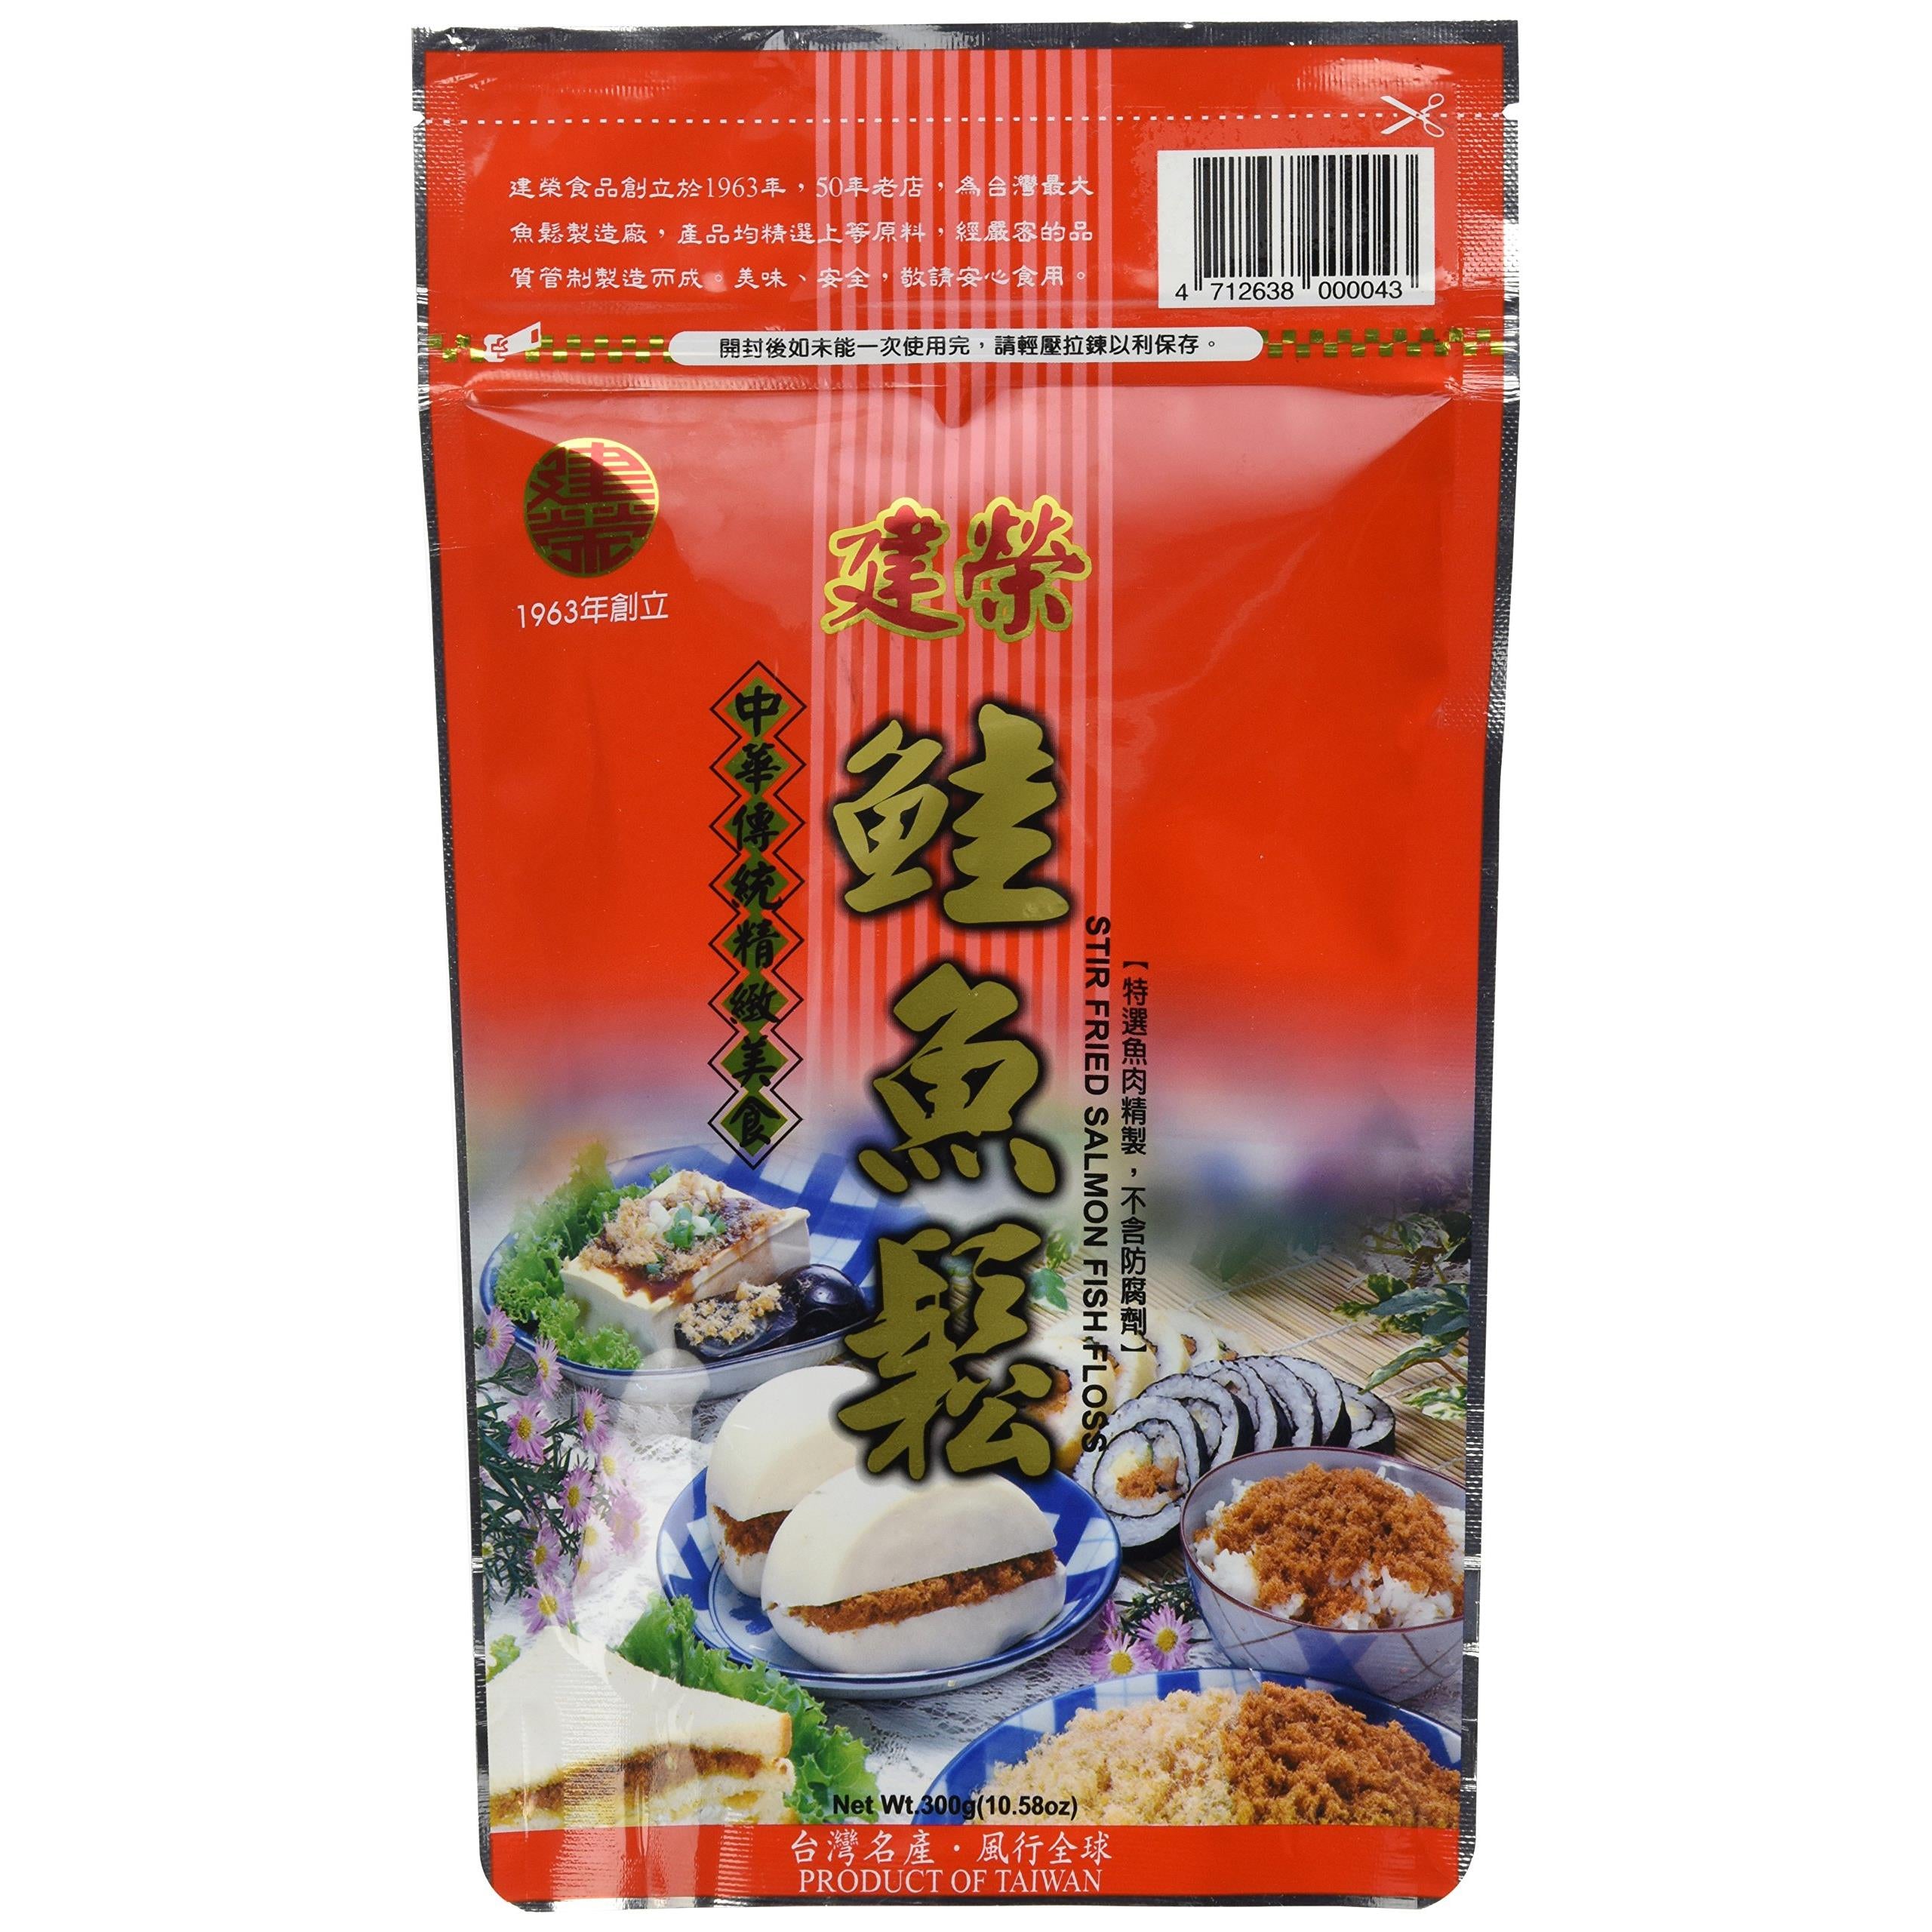 10.58oz Stir Fried Salmon Fish Floss by Chien Jung, Pack of 1